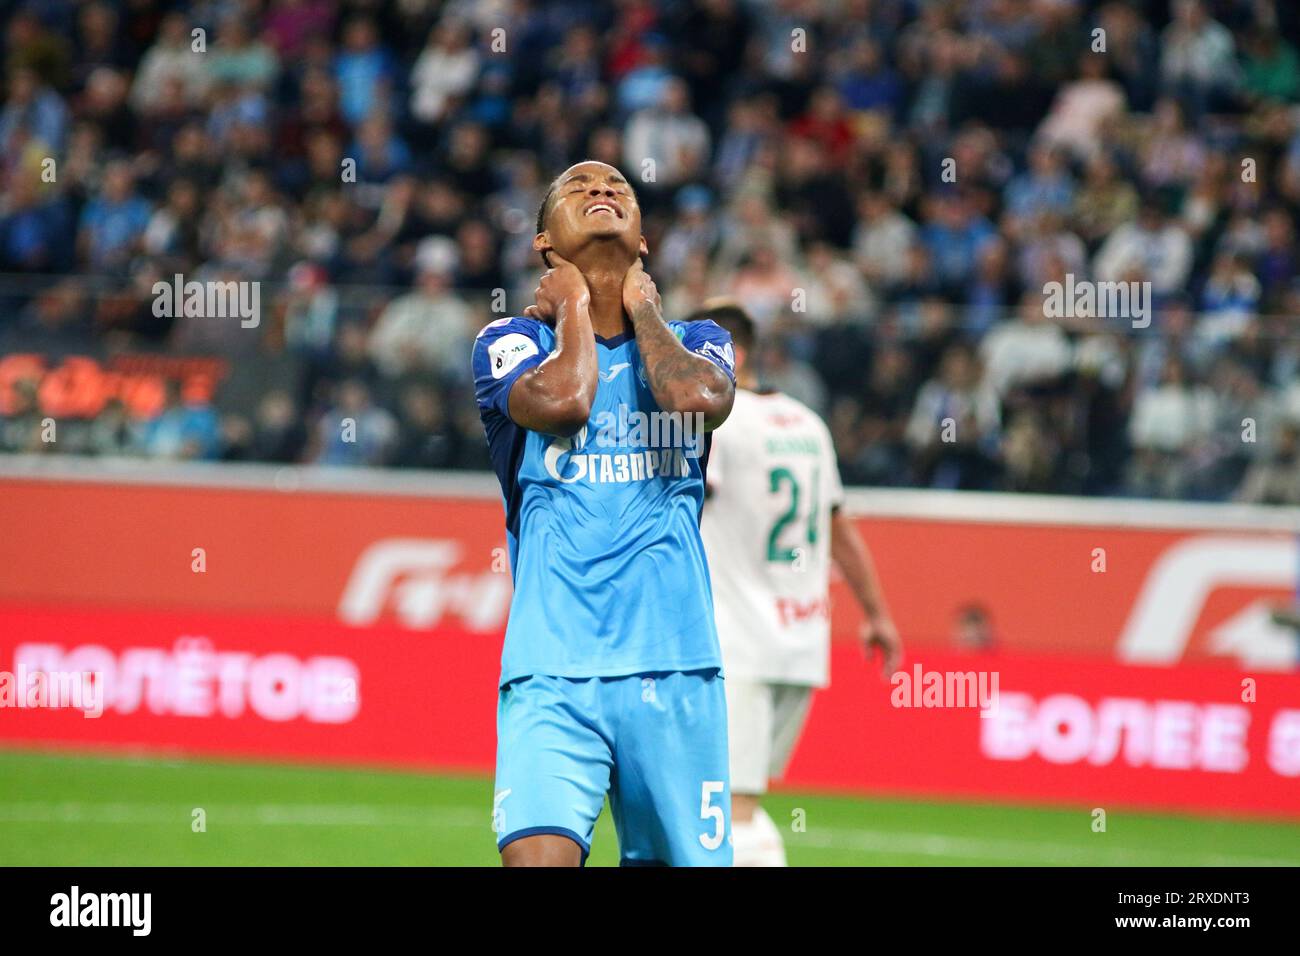 Saint Petersburg, Russia. 24th Sep, 2023. Wilmar Enrique Barrios Teran, known as Wilmar Barrios (5) of Zenit seen during the Russian Premier League football match between Zenit Saint Petersburg and Lokomotiv Moscow at Gazprom Arena. Final score; Zenit 1:2 Lokomotiv Moscow. (Photo by Maksim Konstantinov/SOPA Images/Sipa USA) Credit: Sipa USA/Alamy Live News Stock Photo